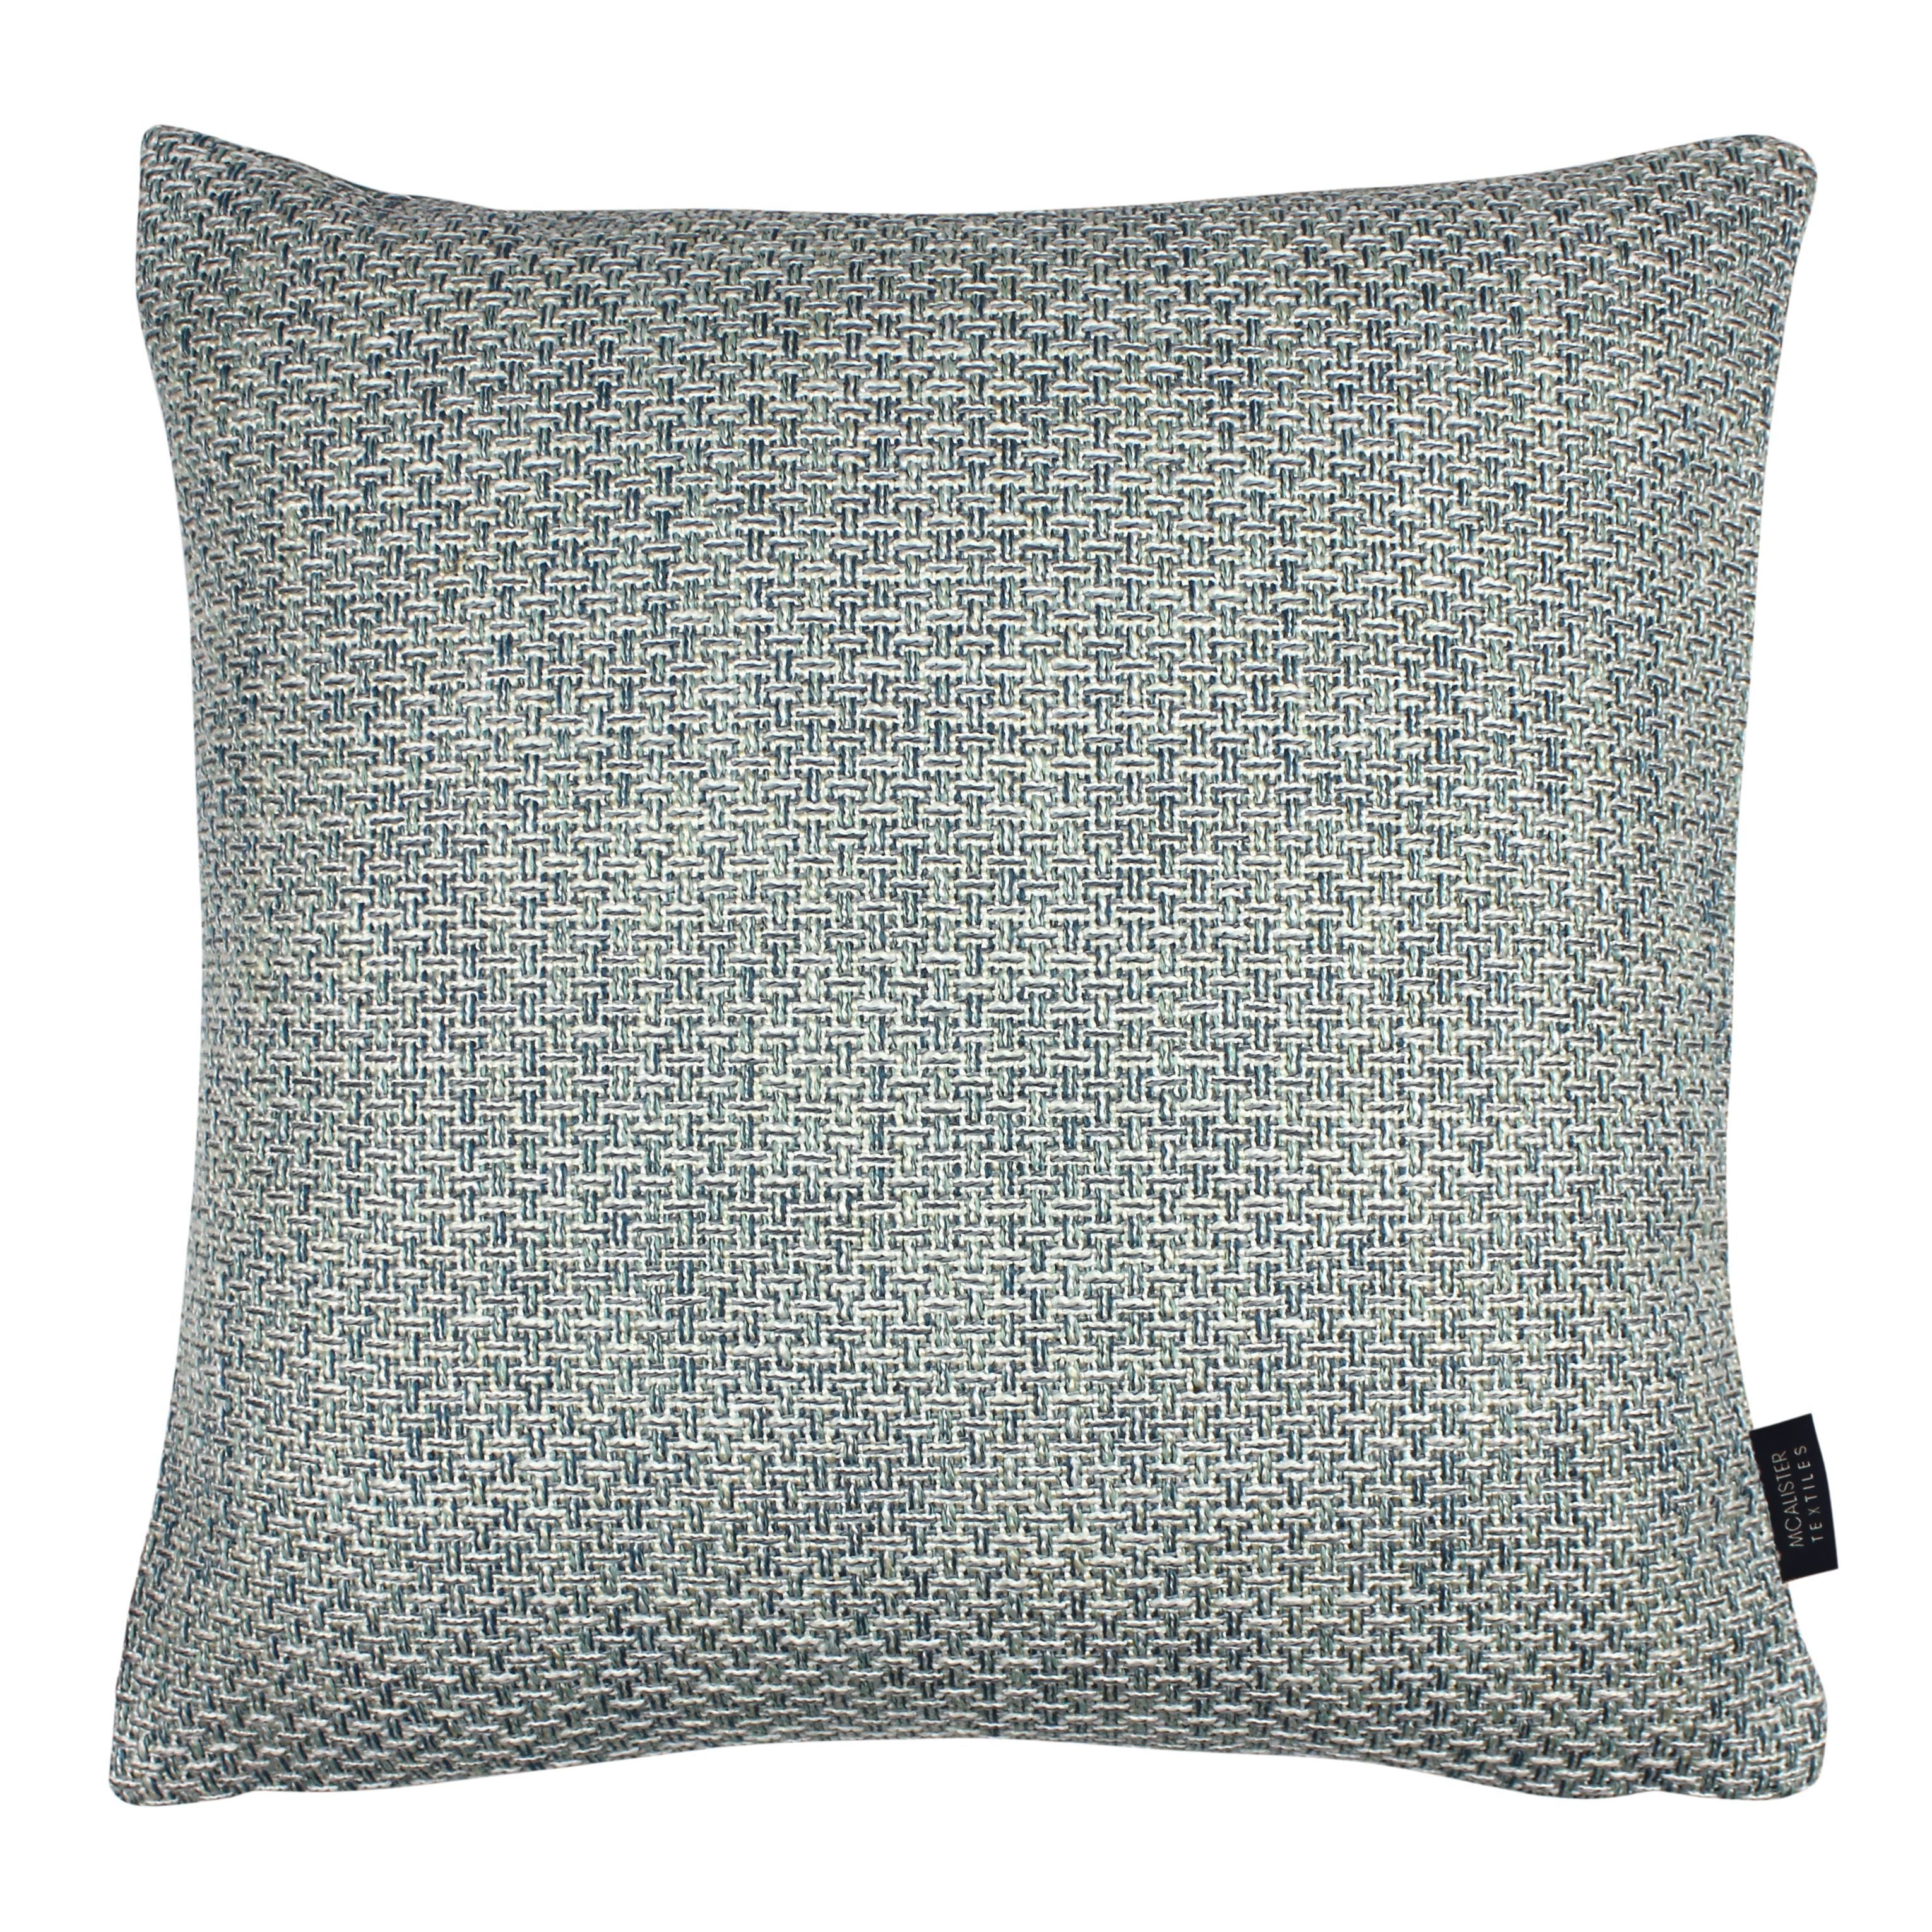 McAlister Textiles Skye Tweed Cushion - Teal Cushions and Covers Cover Only 43cm x 43cm 